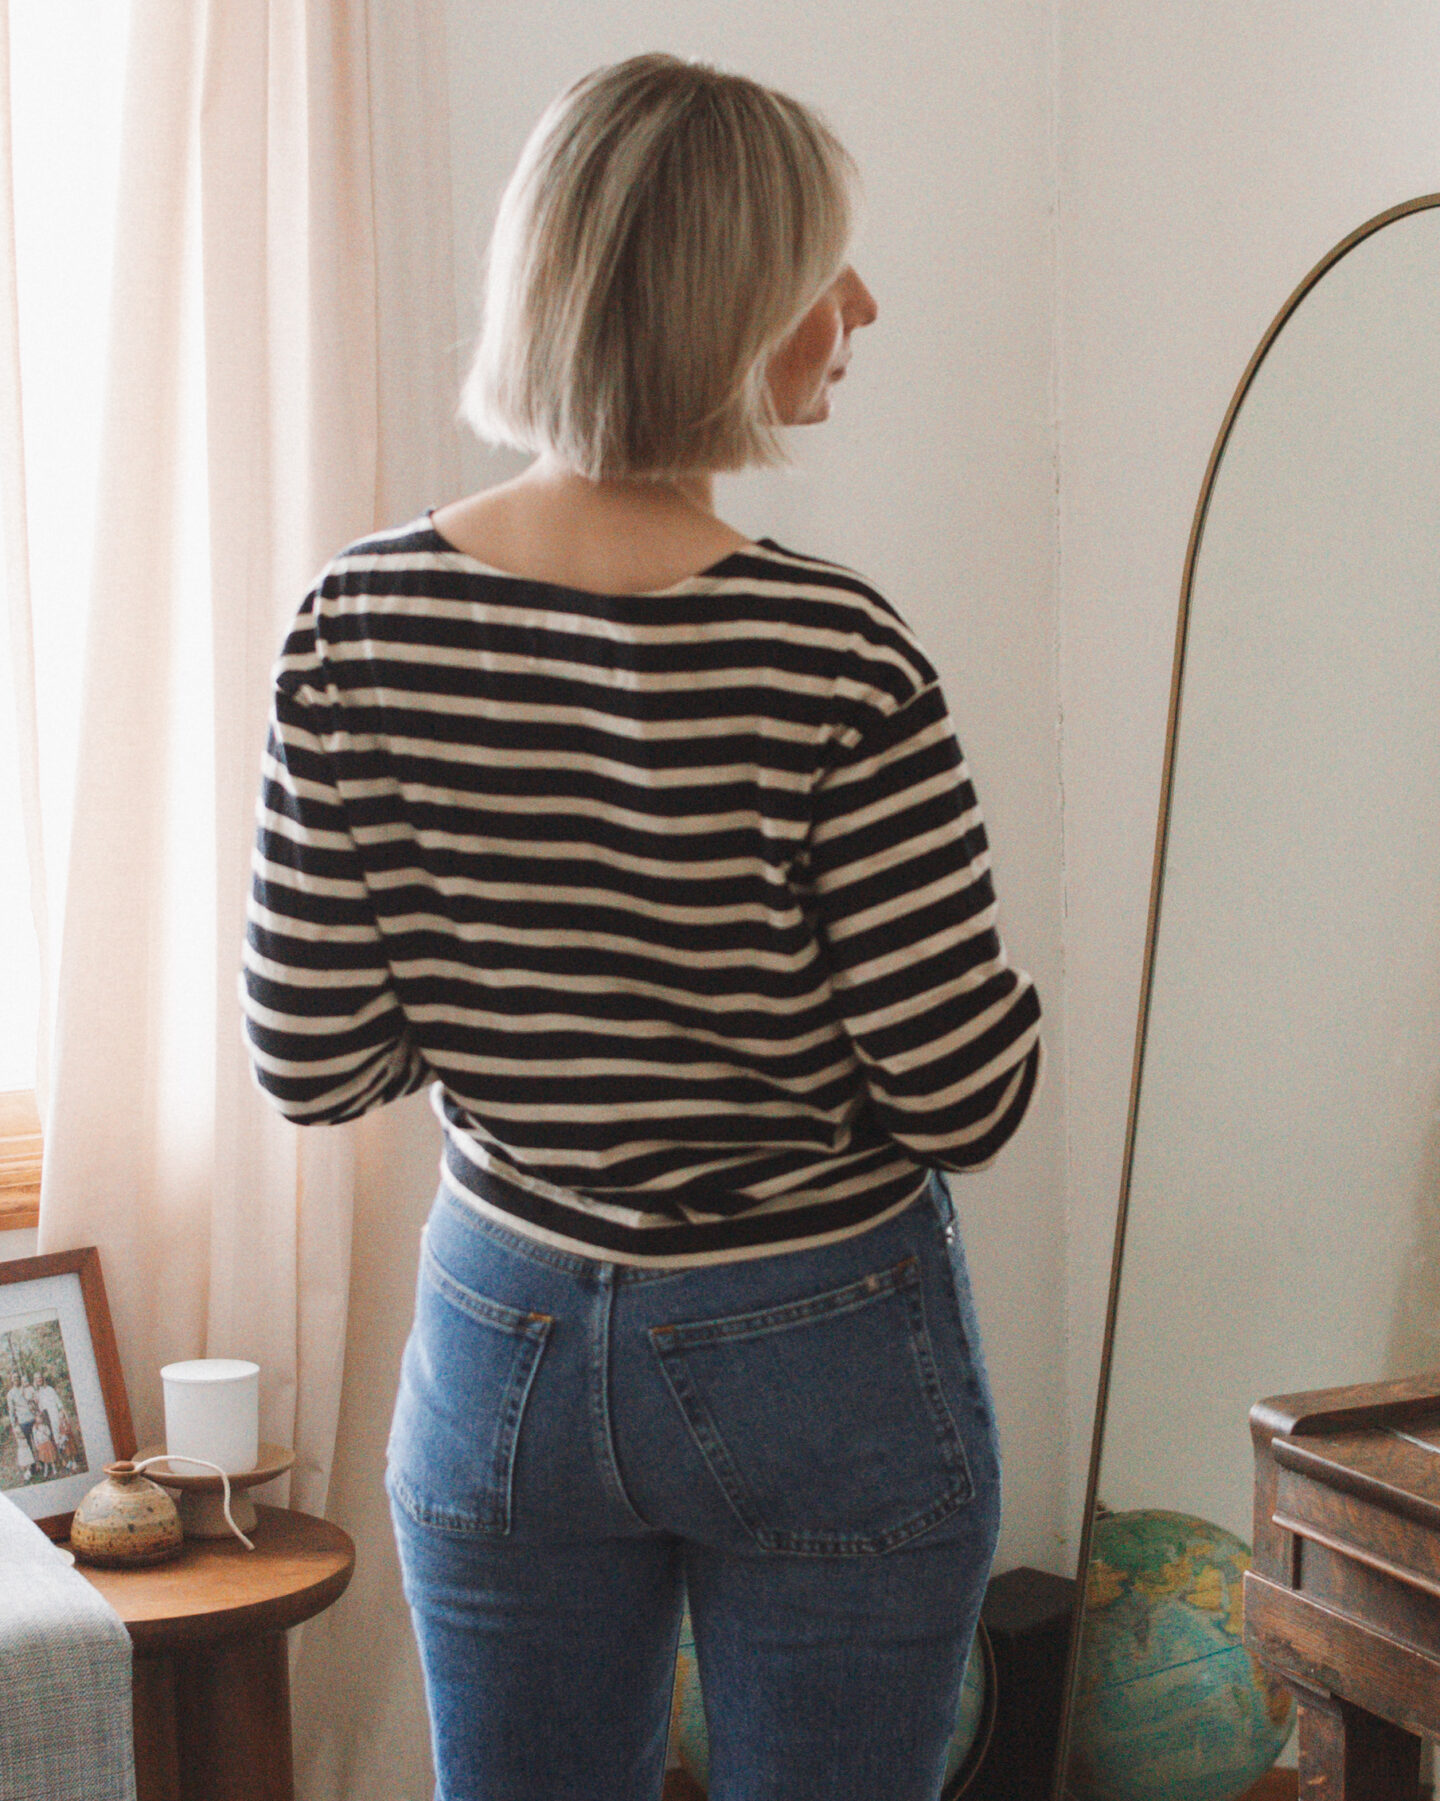 Karin Emily wears and reviews the new Way High Slim Jean from Everlane with a Breton tee and a pair of brown ballet flats